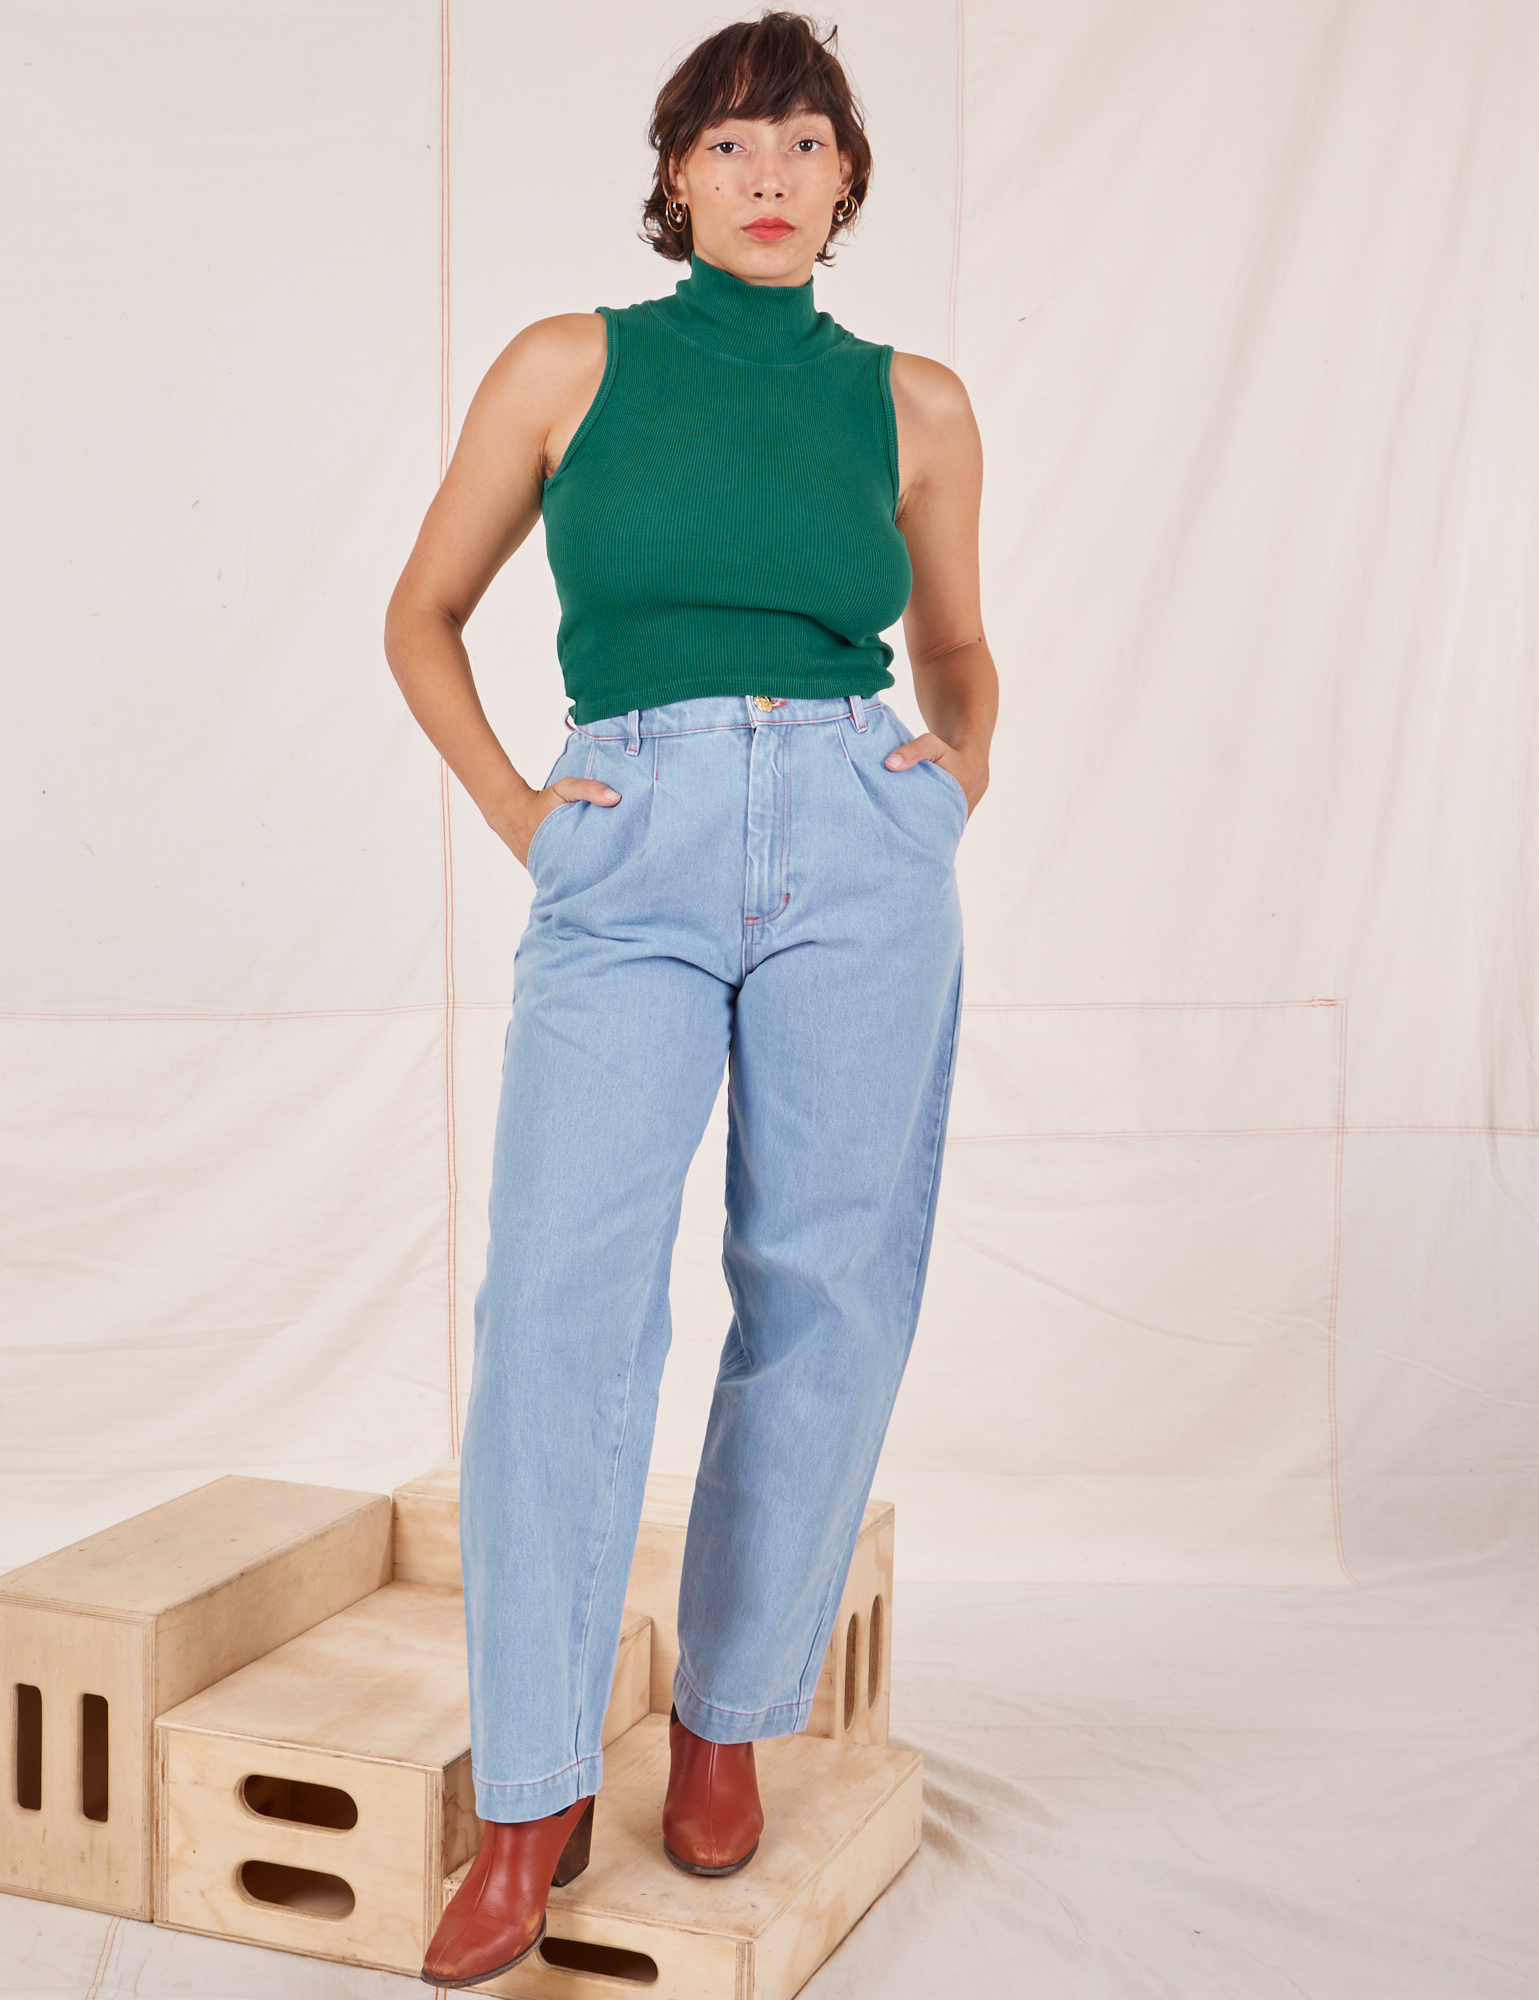 Tiara is 5&#39;4&quot; and wearing XS Sleeveless Essential Turtleneck in Hunter Green